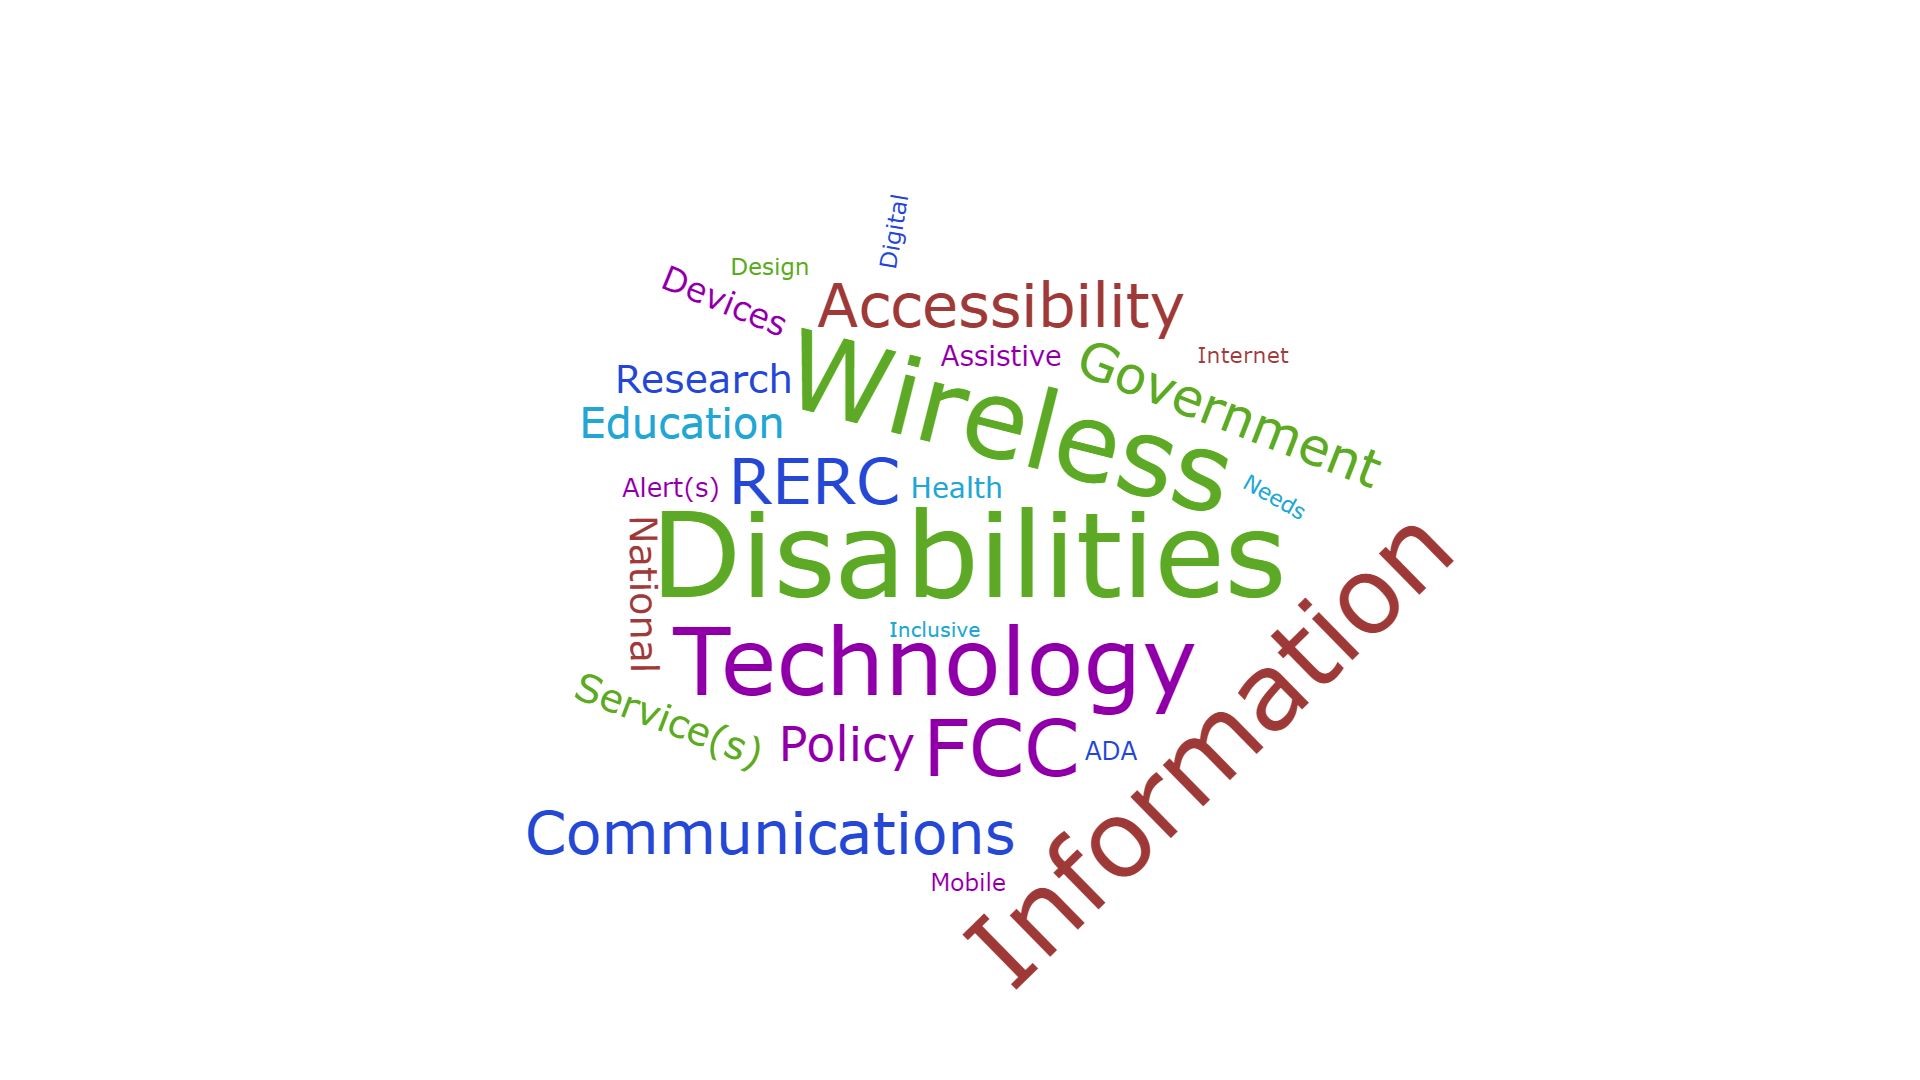 Image shows the top 25 key words with those that appeared with greater frequency being larger than words that appeared less frequently.  In descending order, the words are: Disabilities  Wireless Information Technology FCC RERC Accessibility Emergency Communications Government Policy Education Research  Service(s) National Devices Health Assistive Alert(s) ADA Digital Mobile Design Internet